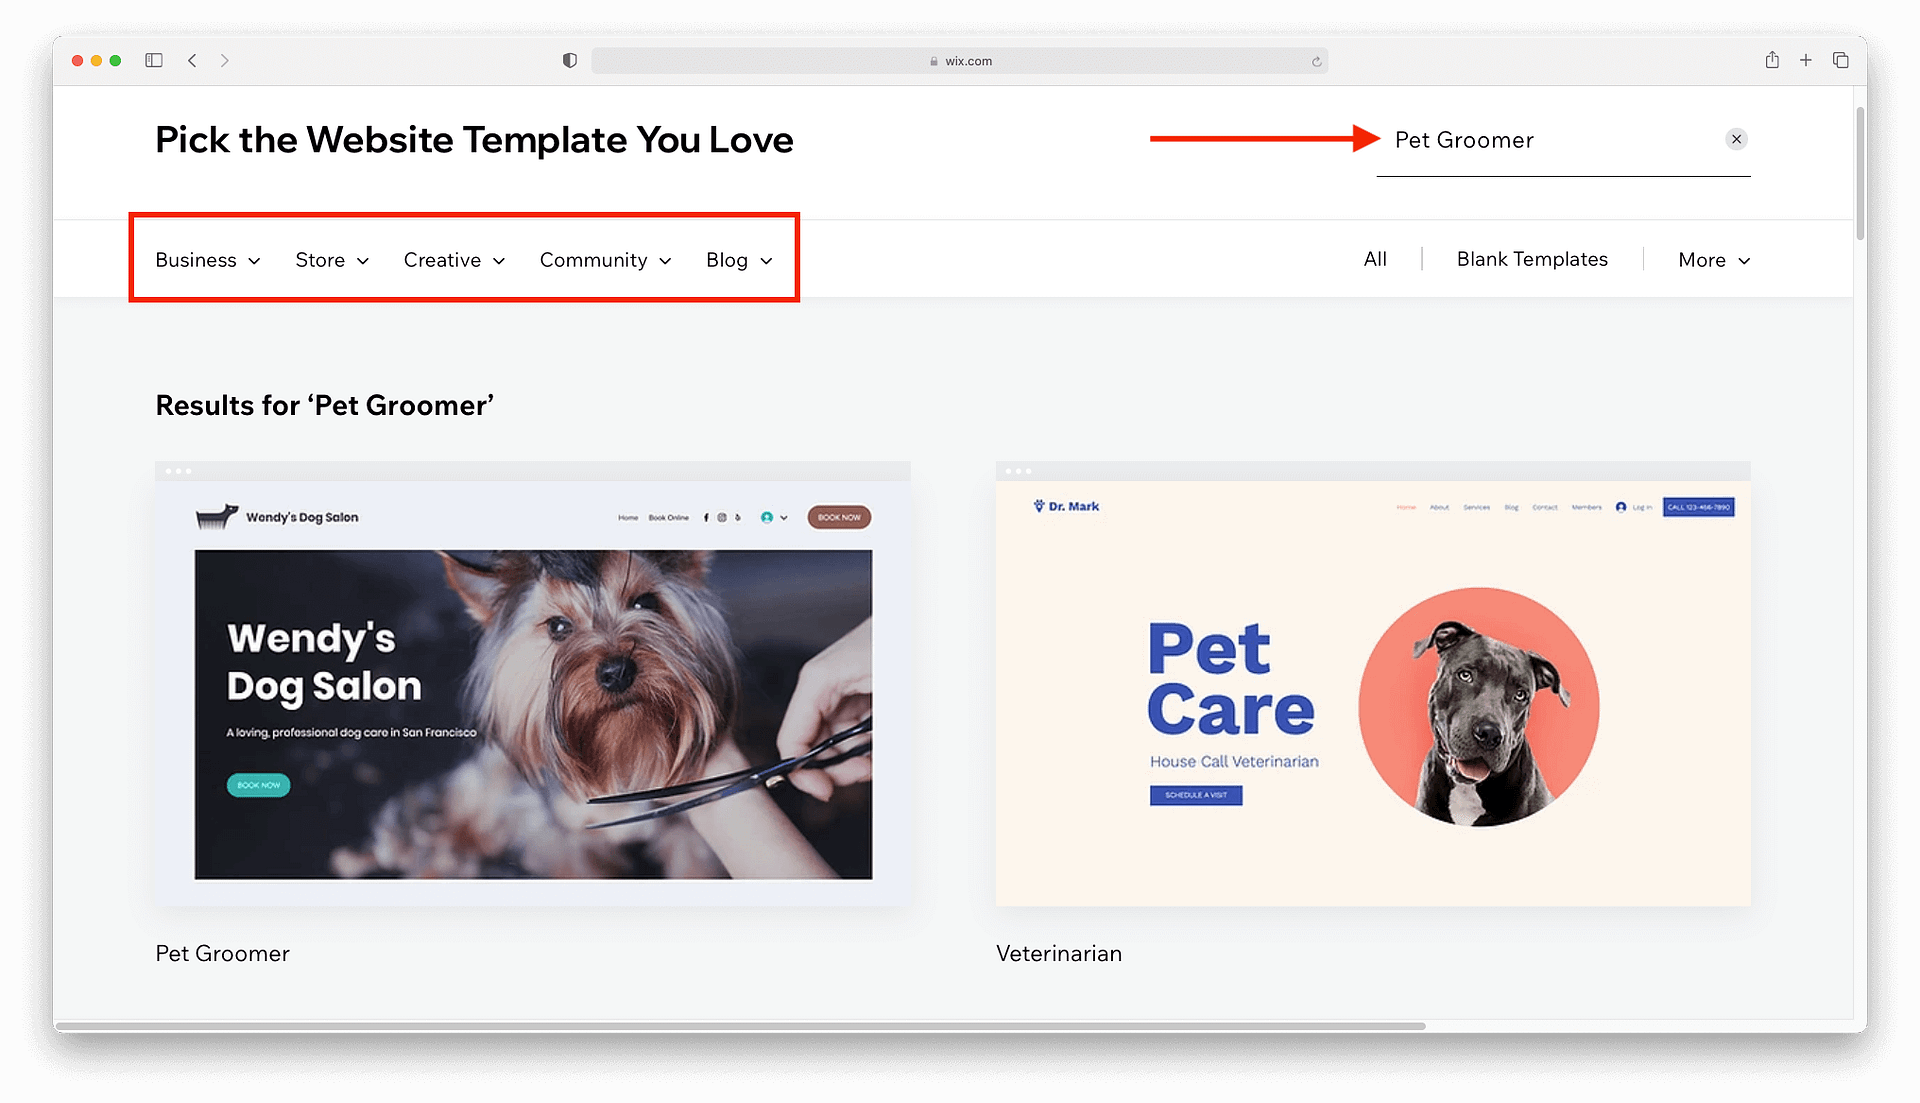 The Wix template options